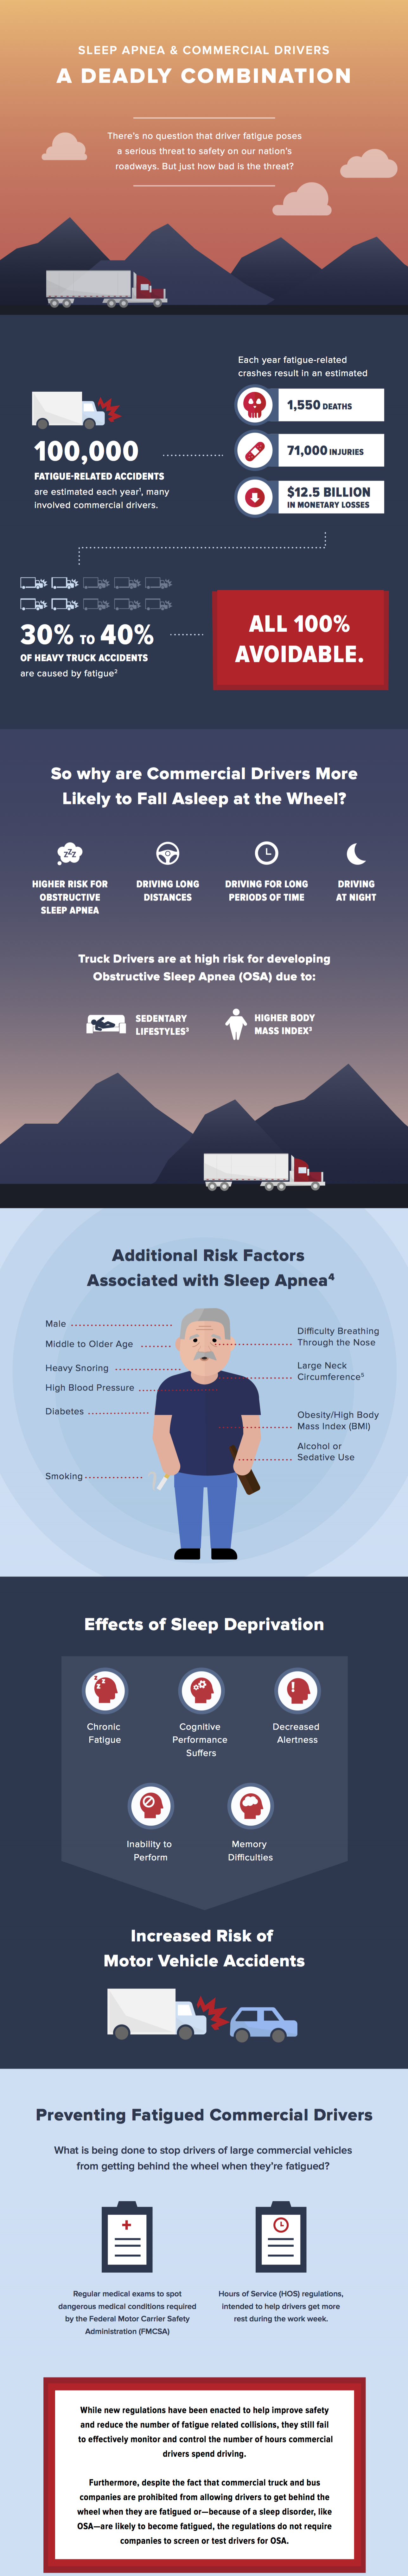 Sleep-Apnea-Commercial-Drivers-Infographic-206193-edited.png